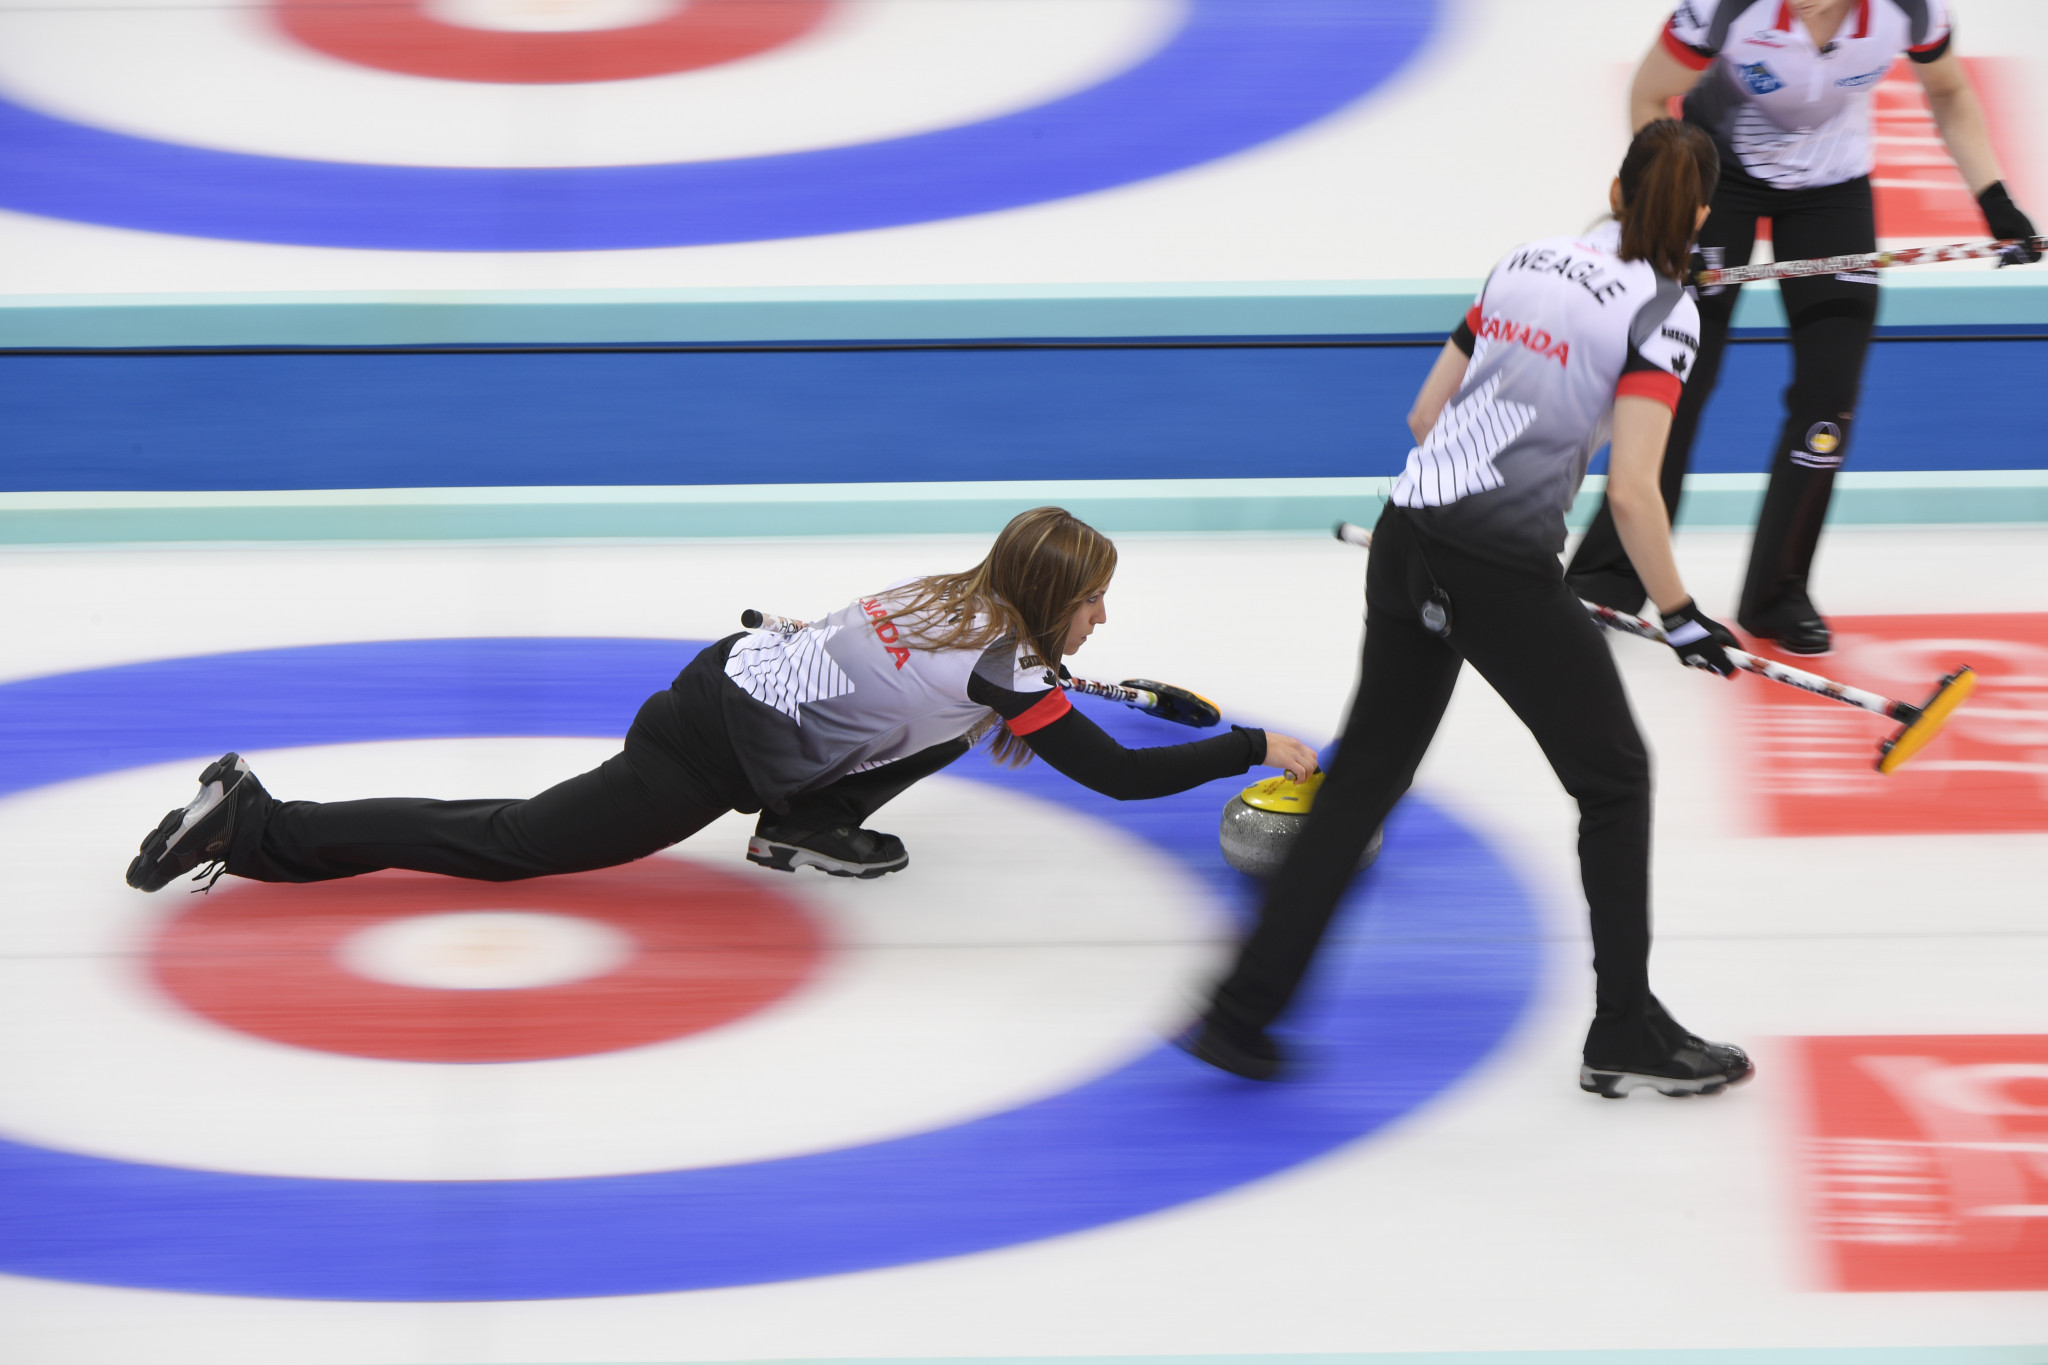 Rachel Homan skipped Canada's women's team to gold at this year's World Championships in Beijing ©Getty Images